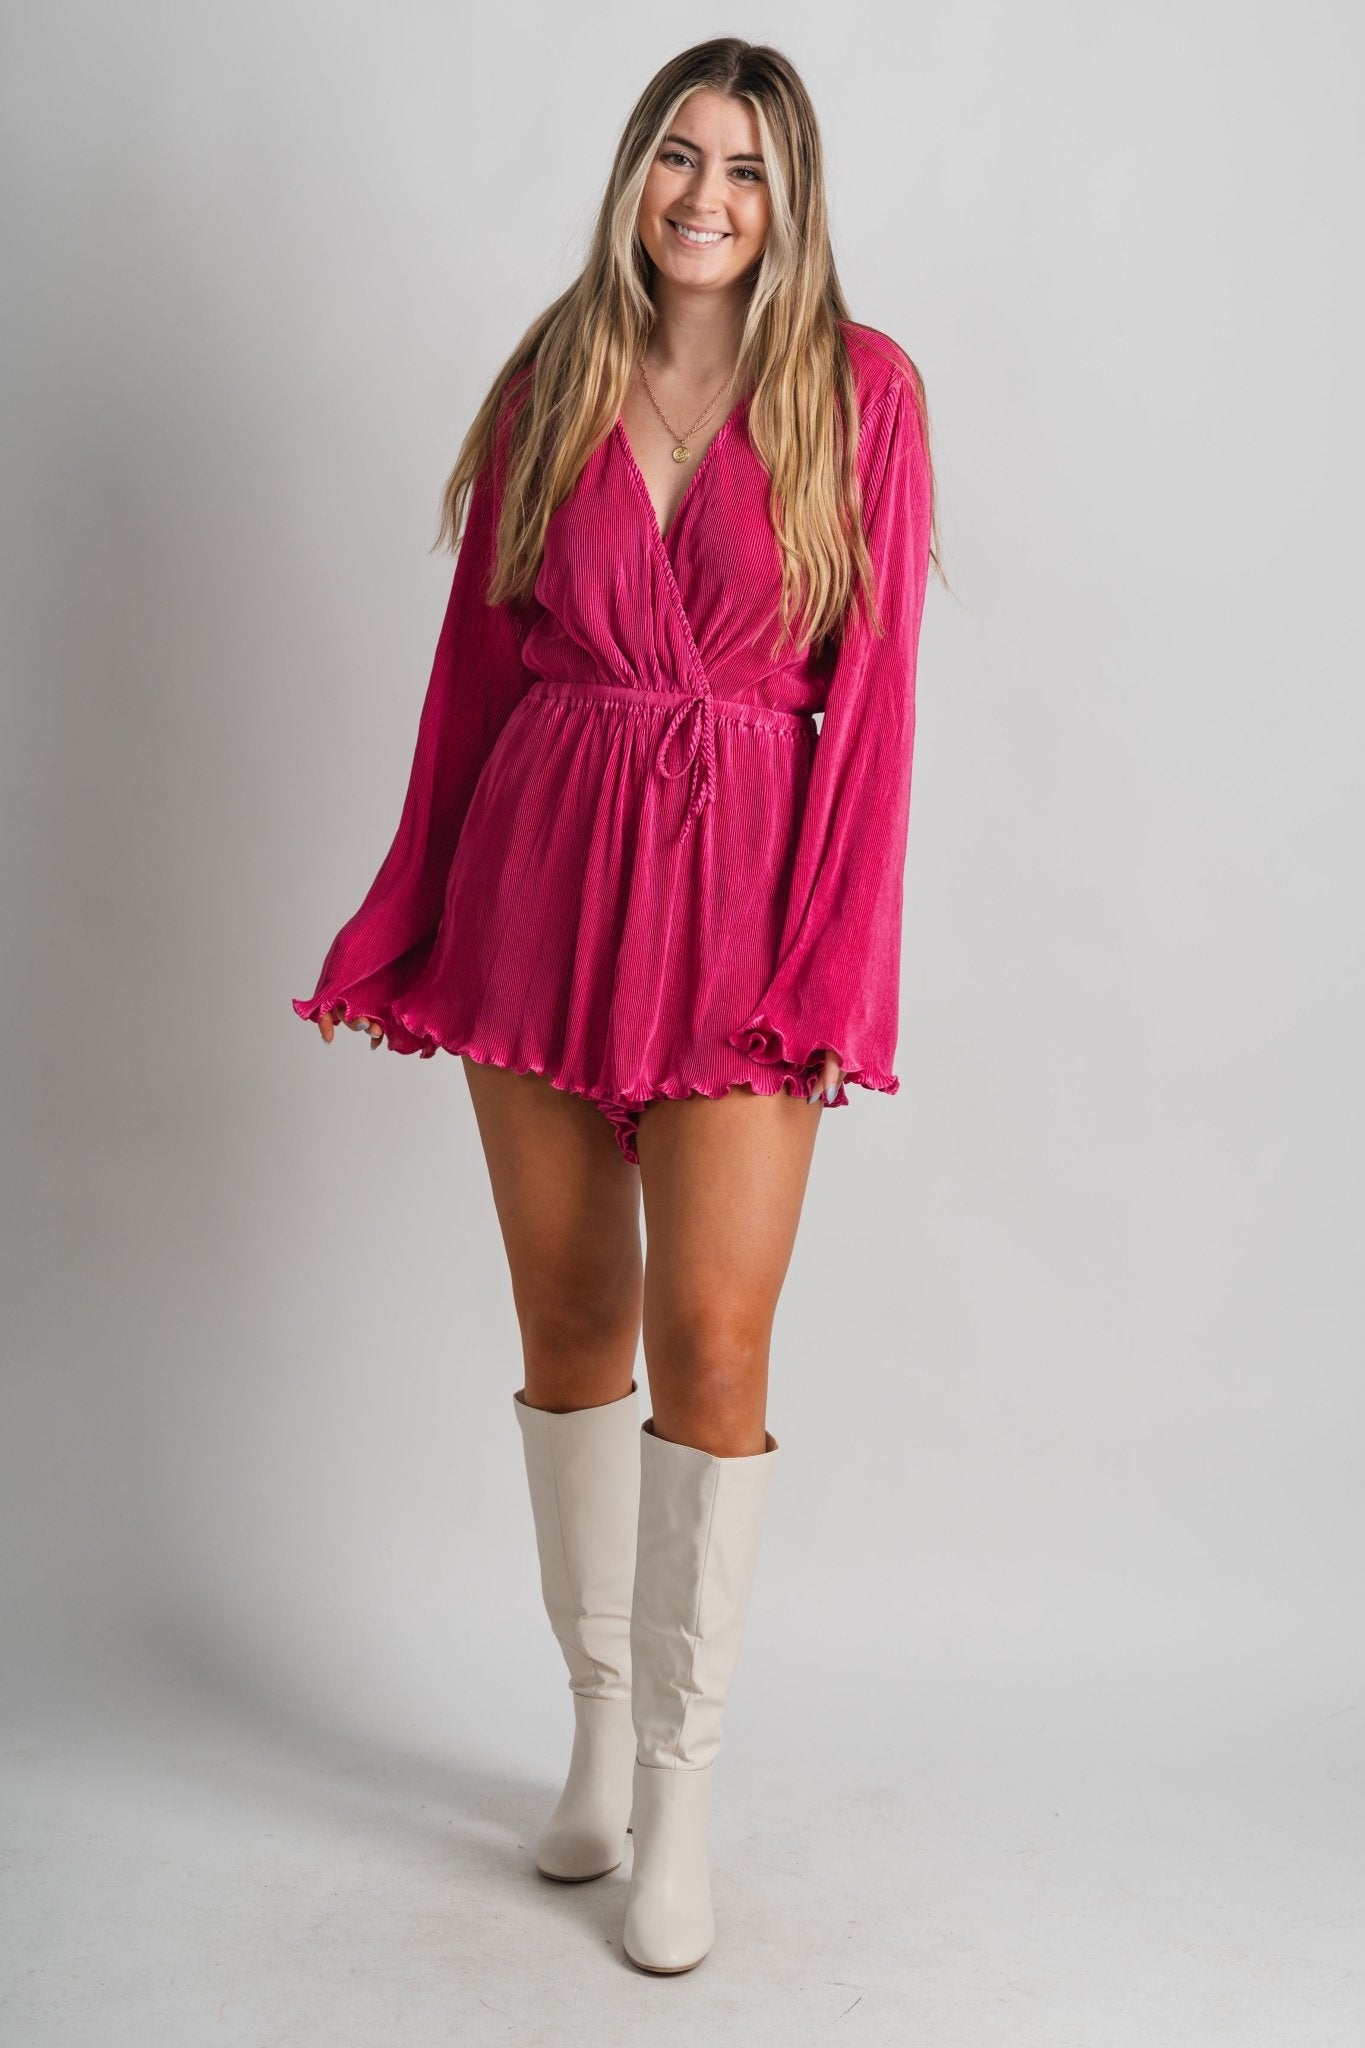 Pleated long sleeve romper fuchsia - Trendy Romper - Fashion Rompers & Pantsuits at Lush Fashion Lounge Boutique in Oklahoma City